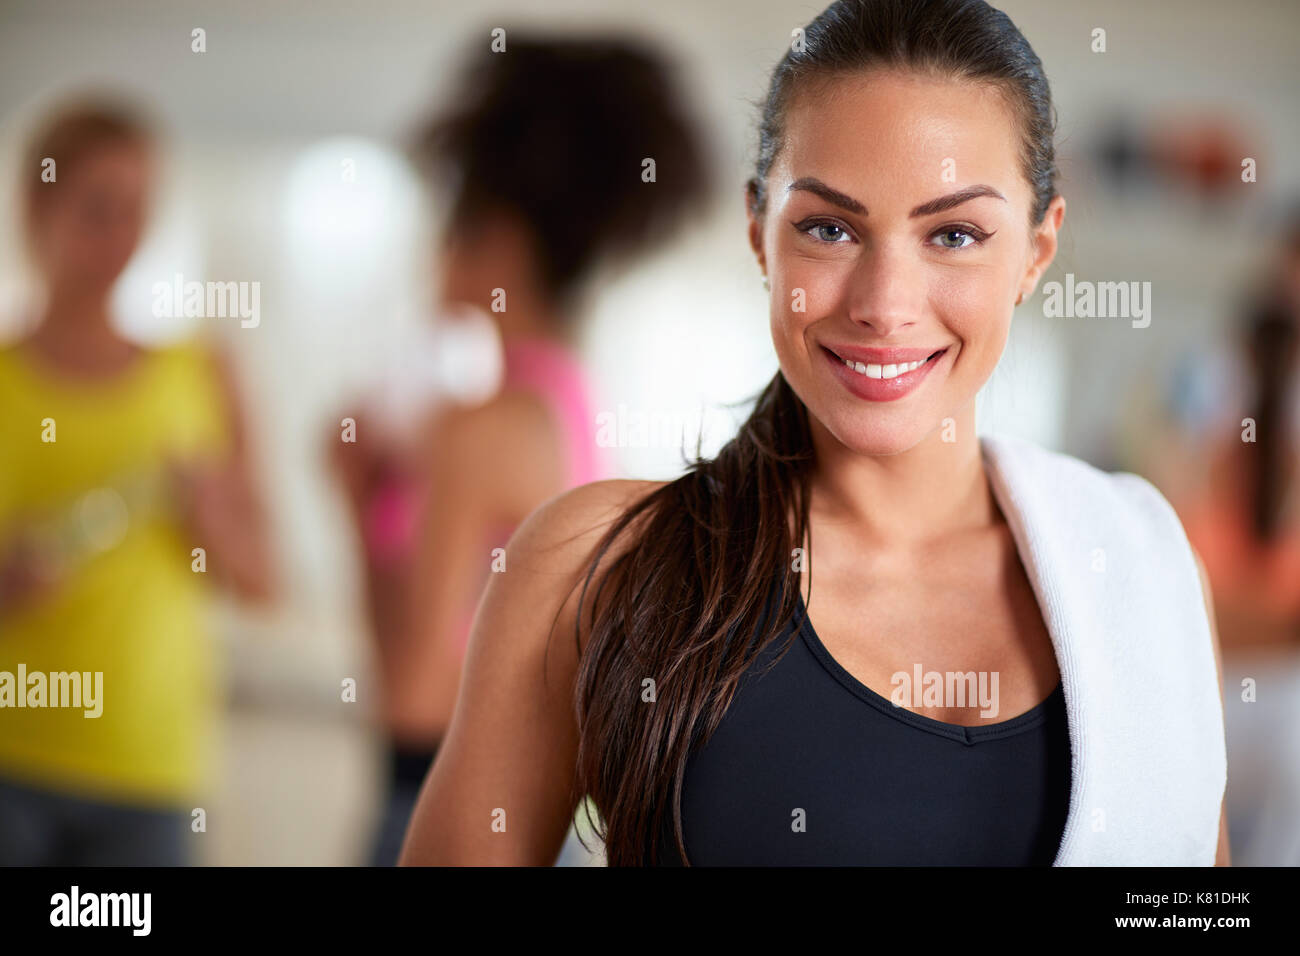 Portrait of beautiful fitness woman after training Stock Photo